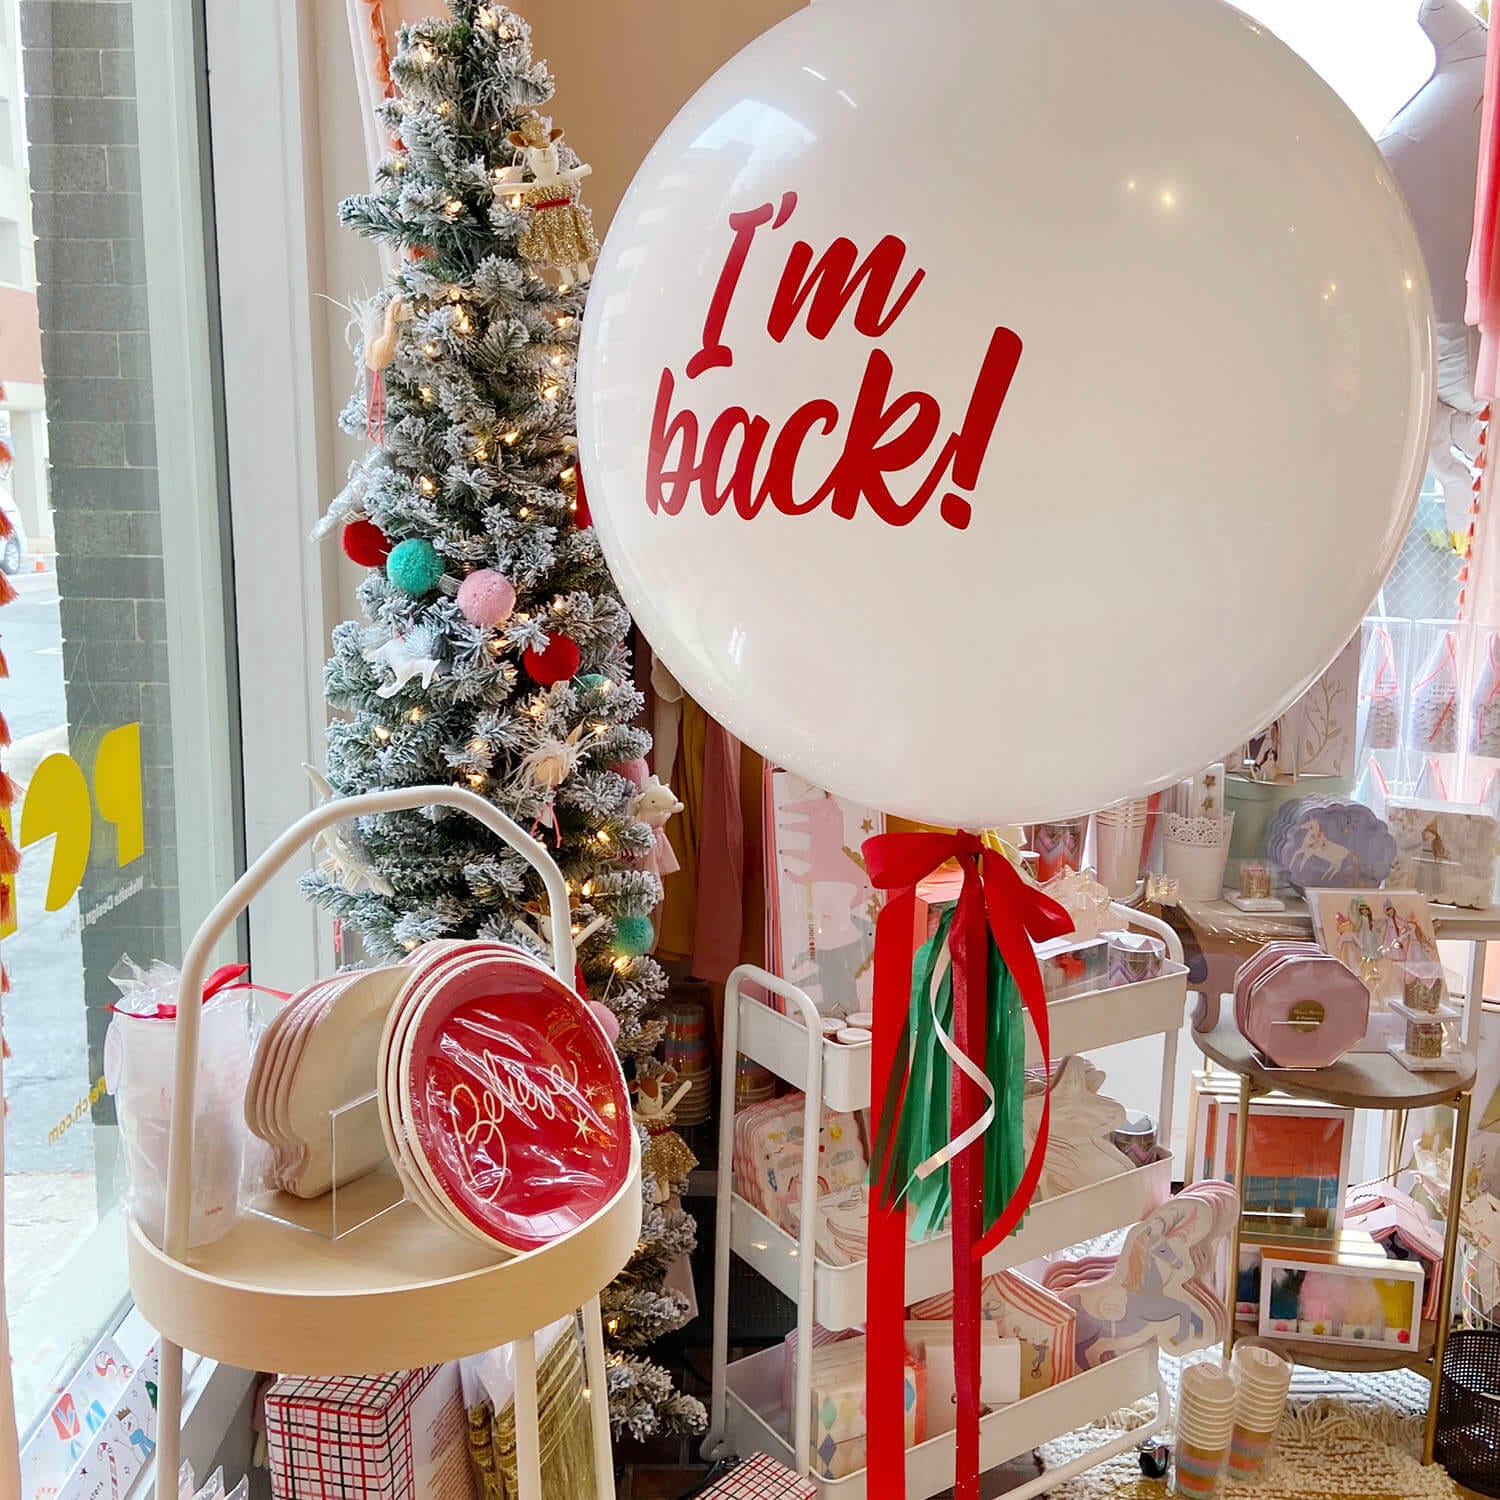 Giant white latex helium balloon for your Elf on a Shelf this Christmas from Just Peachy.